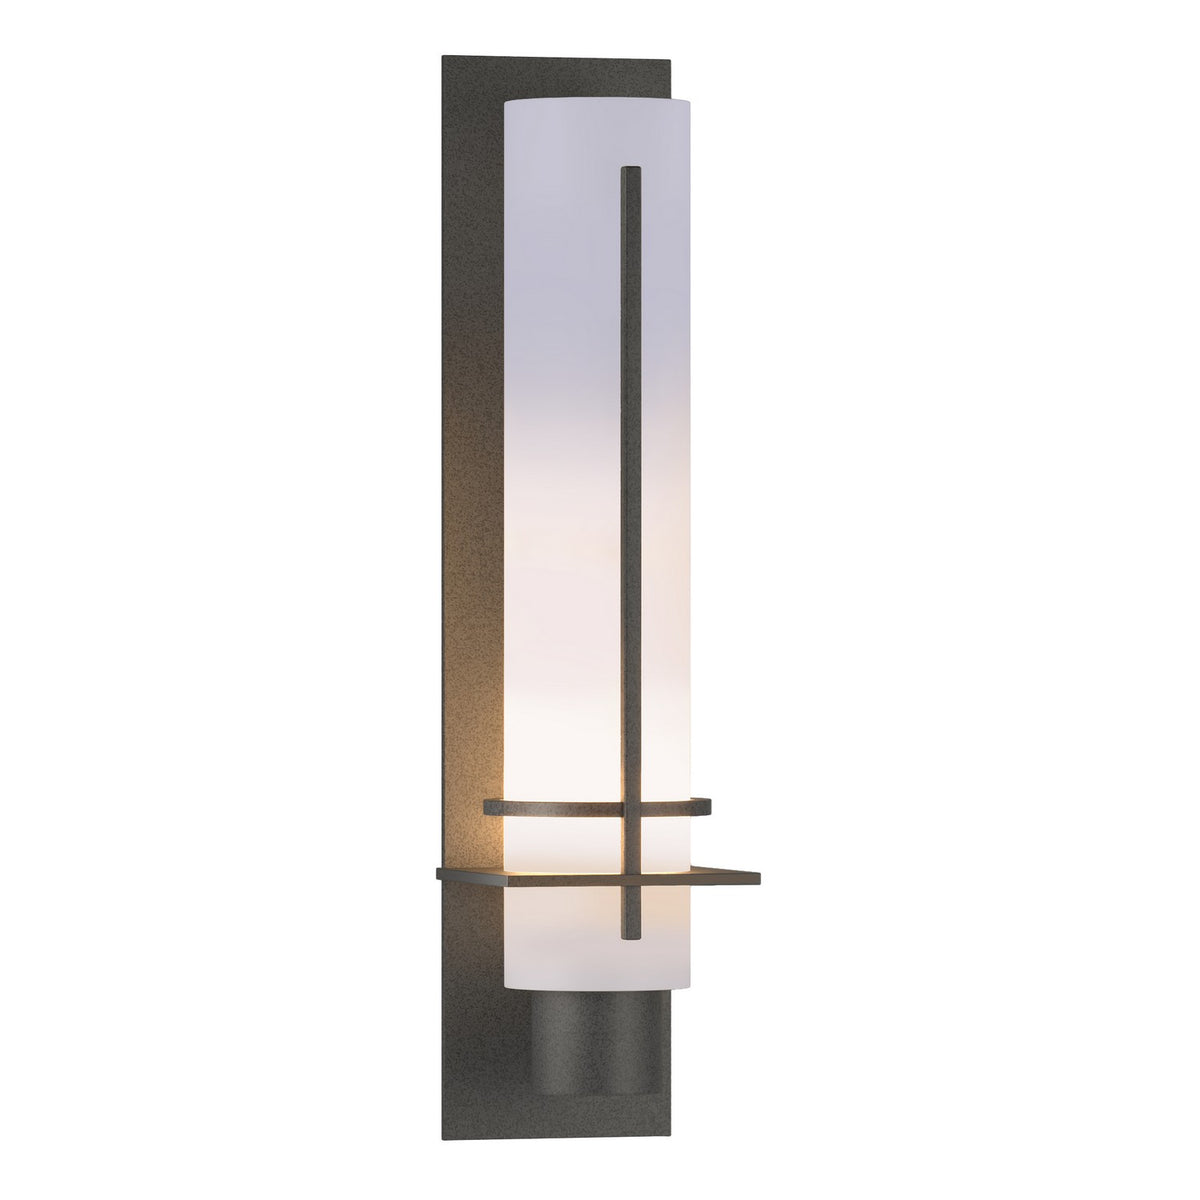 Hubbardton Forge - 207858-SKT-20-GG0173 - One Light Wall Sconce - After Hours - Natural Iron